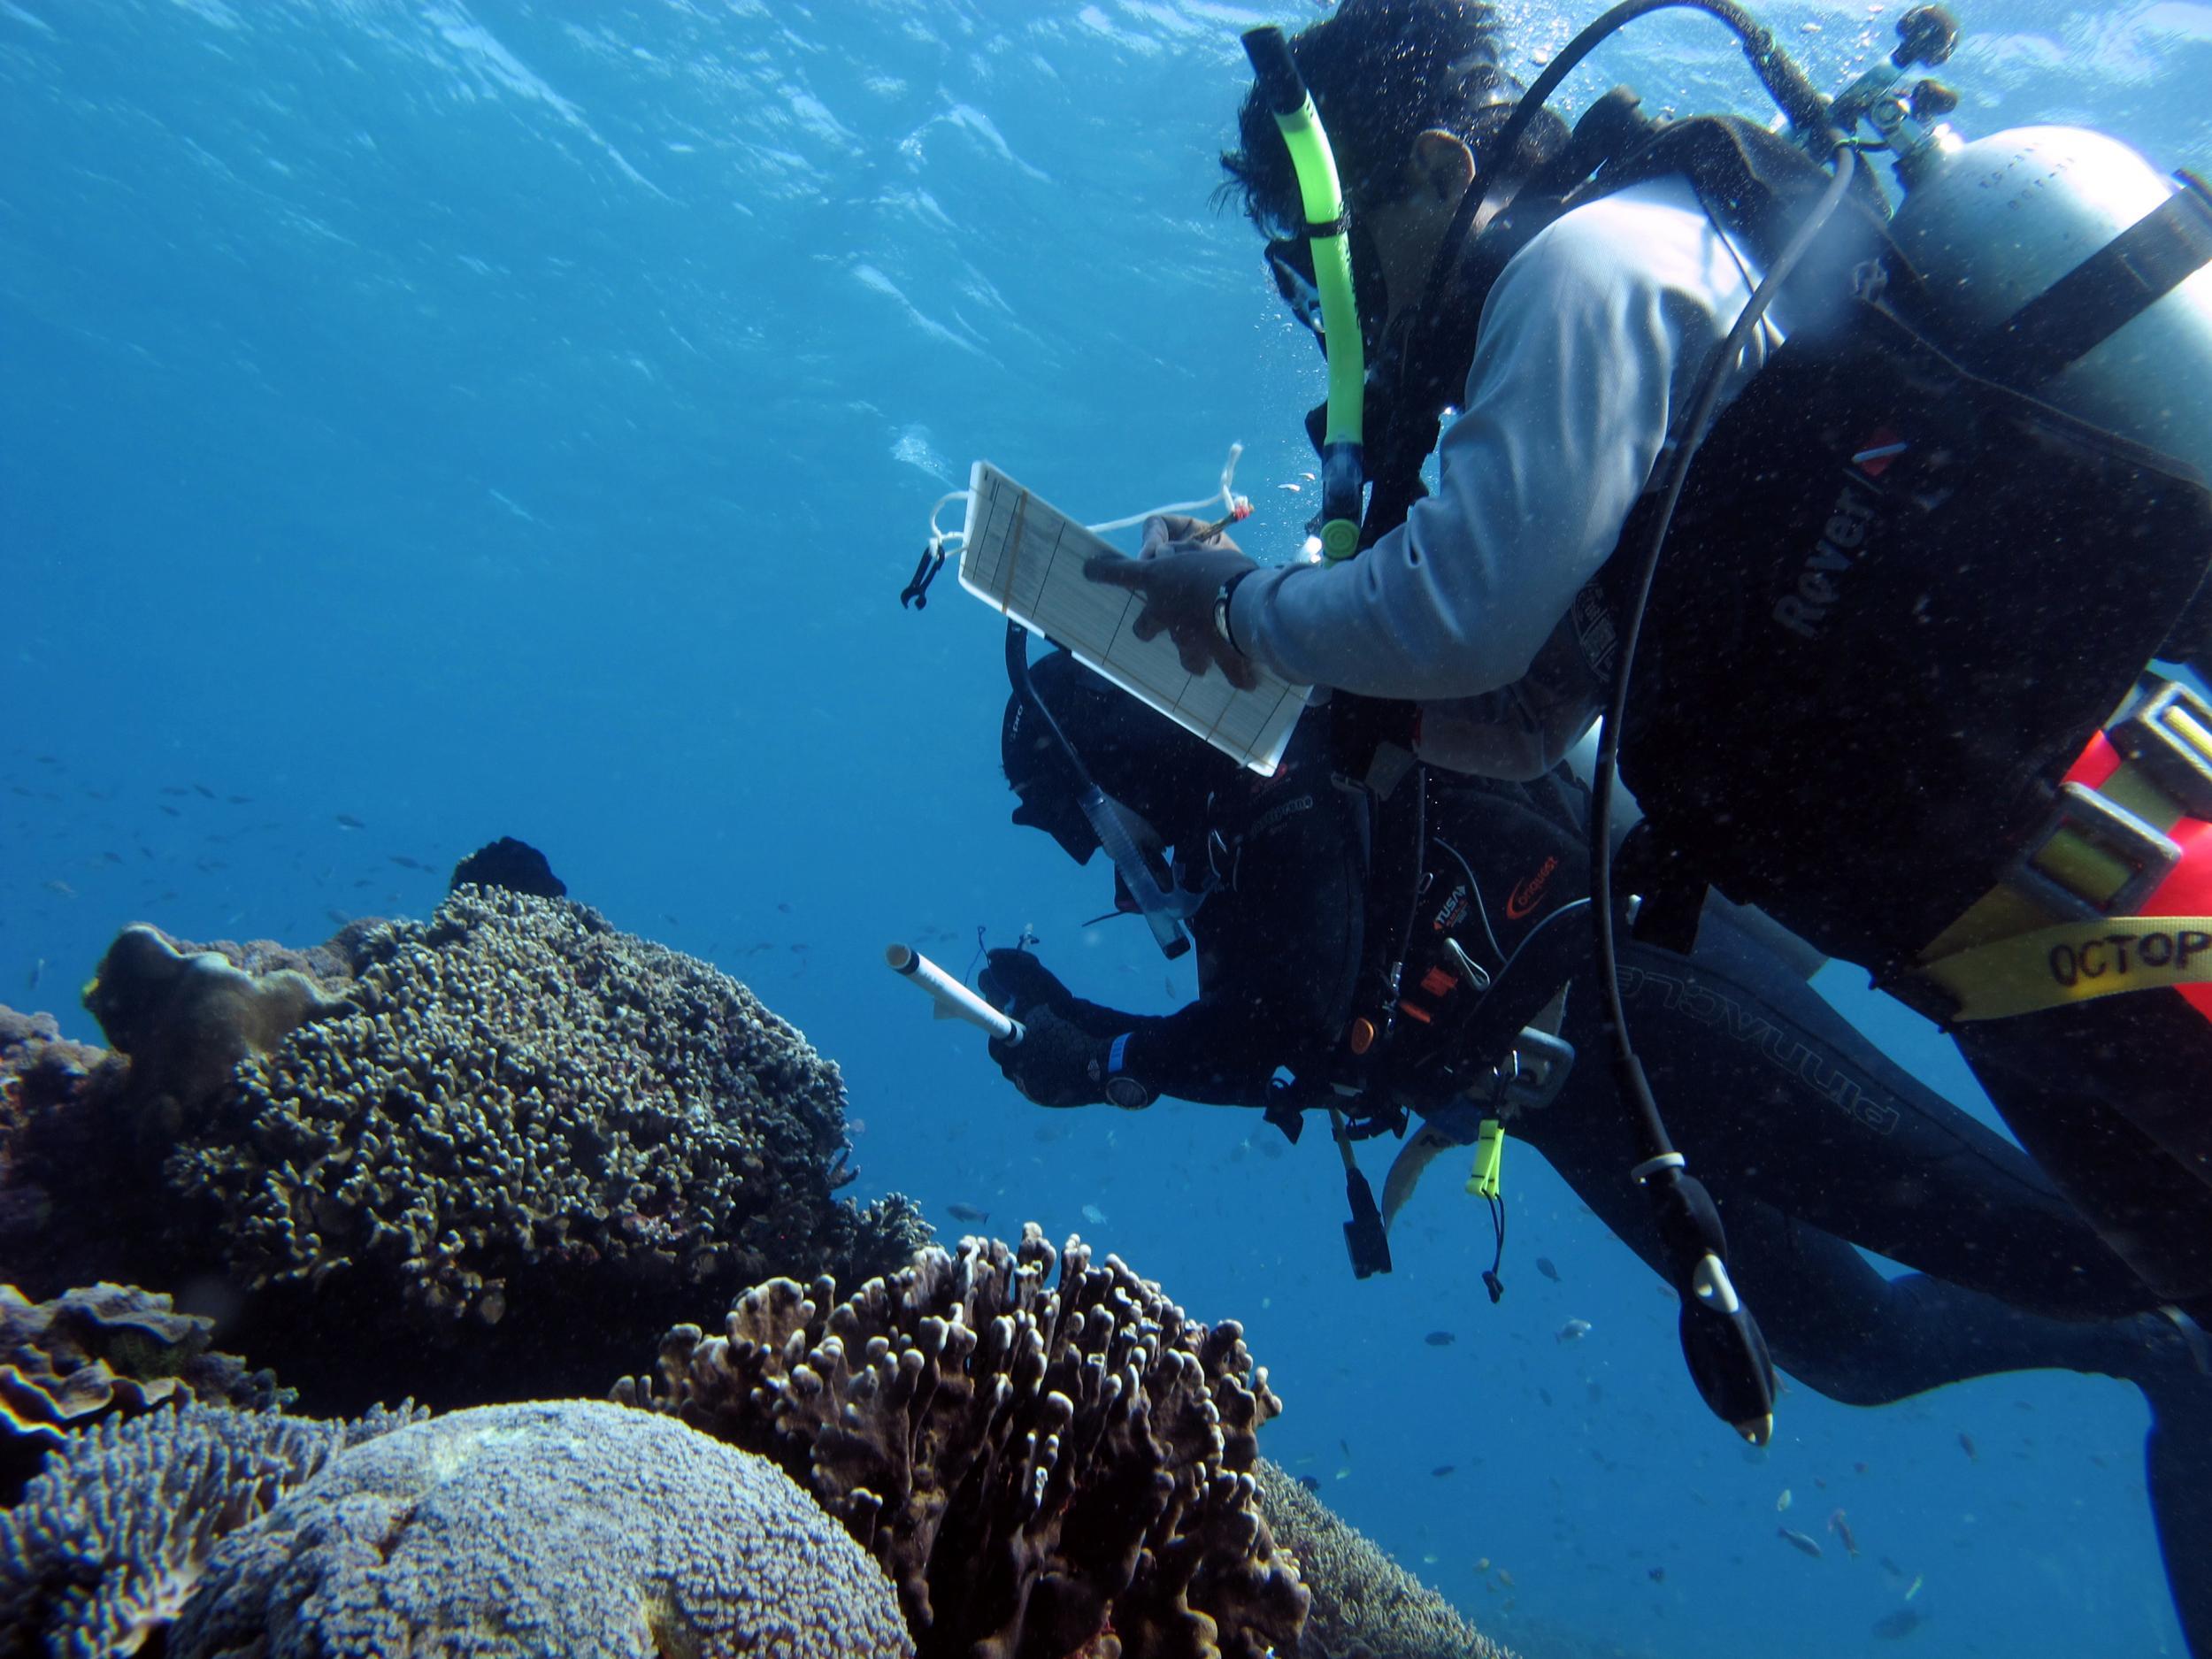 Coral reefs, seen here being inspected by Dr Joleah Lamb and Dr Syafyudin Yusuf, were much healthier when there were seagrass meadows nearby because of their antibacterial properties